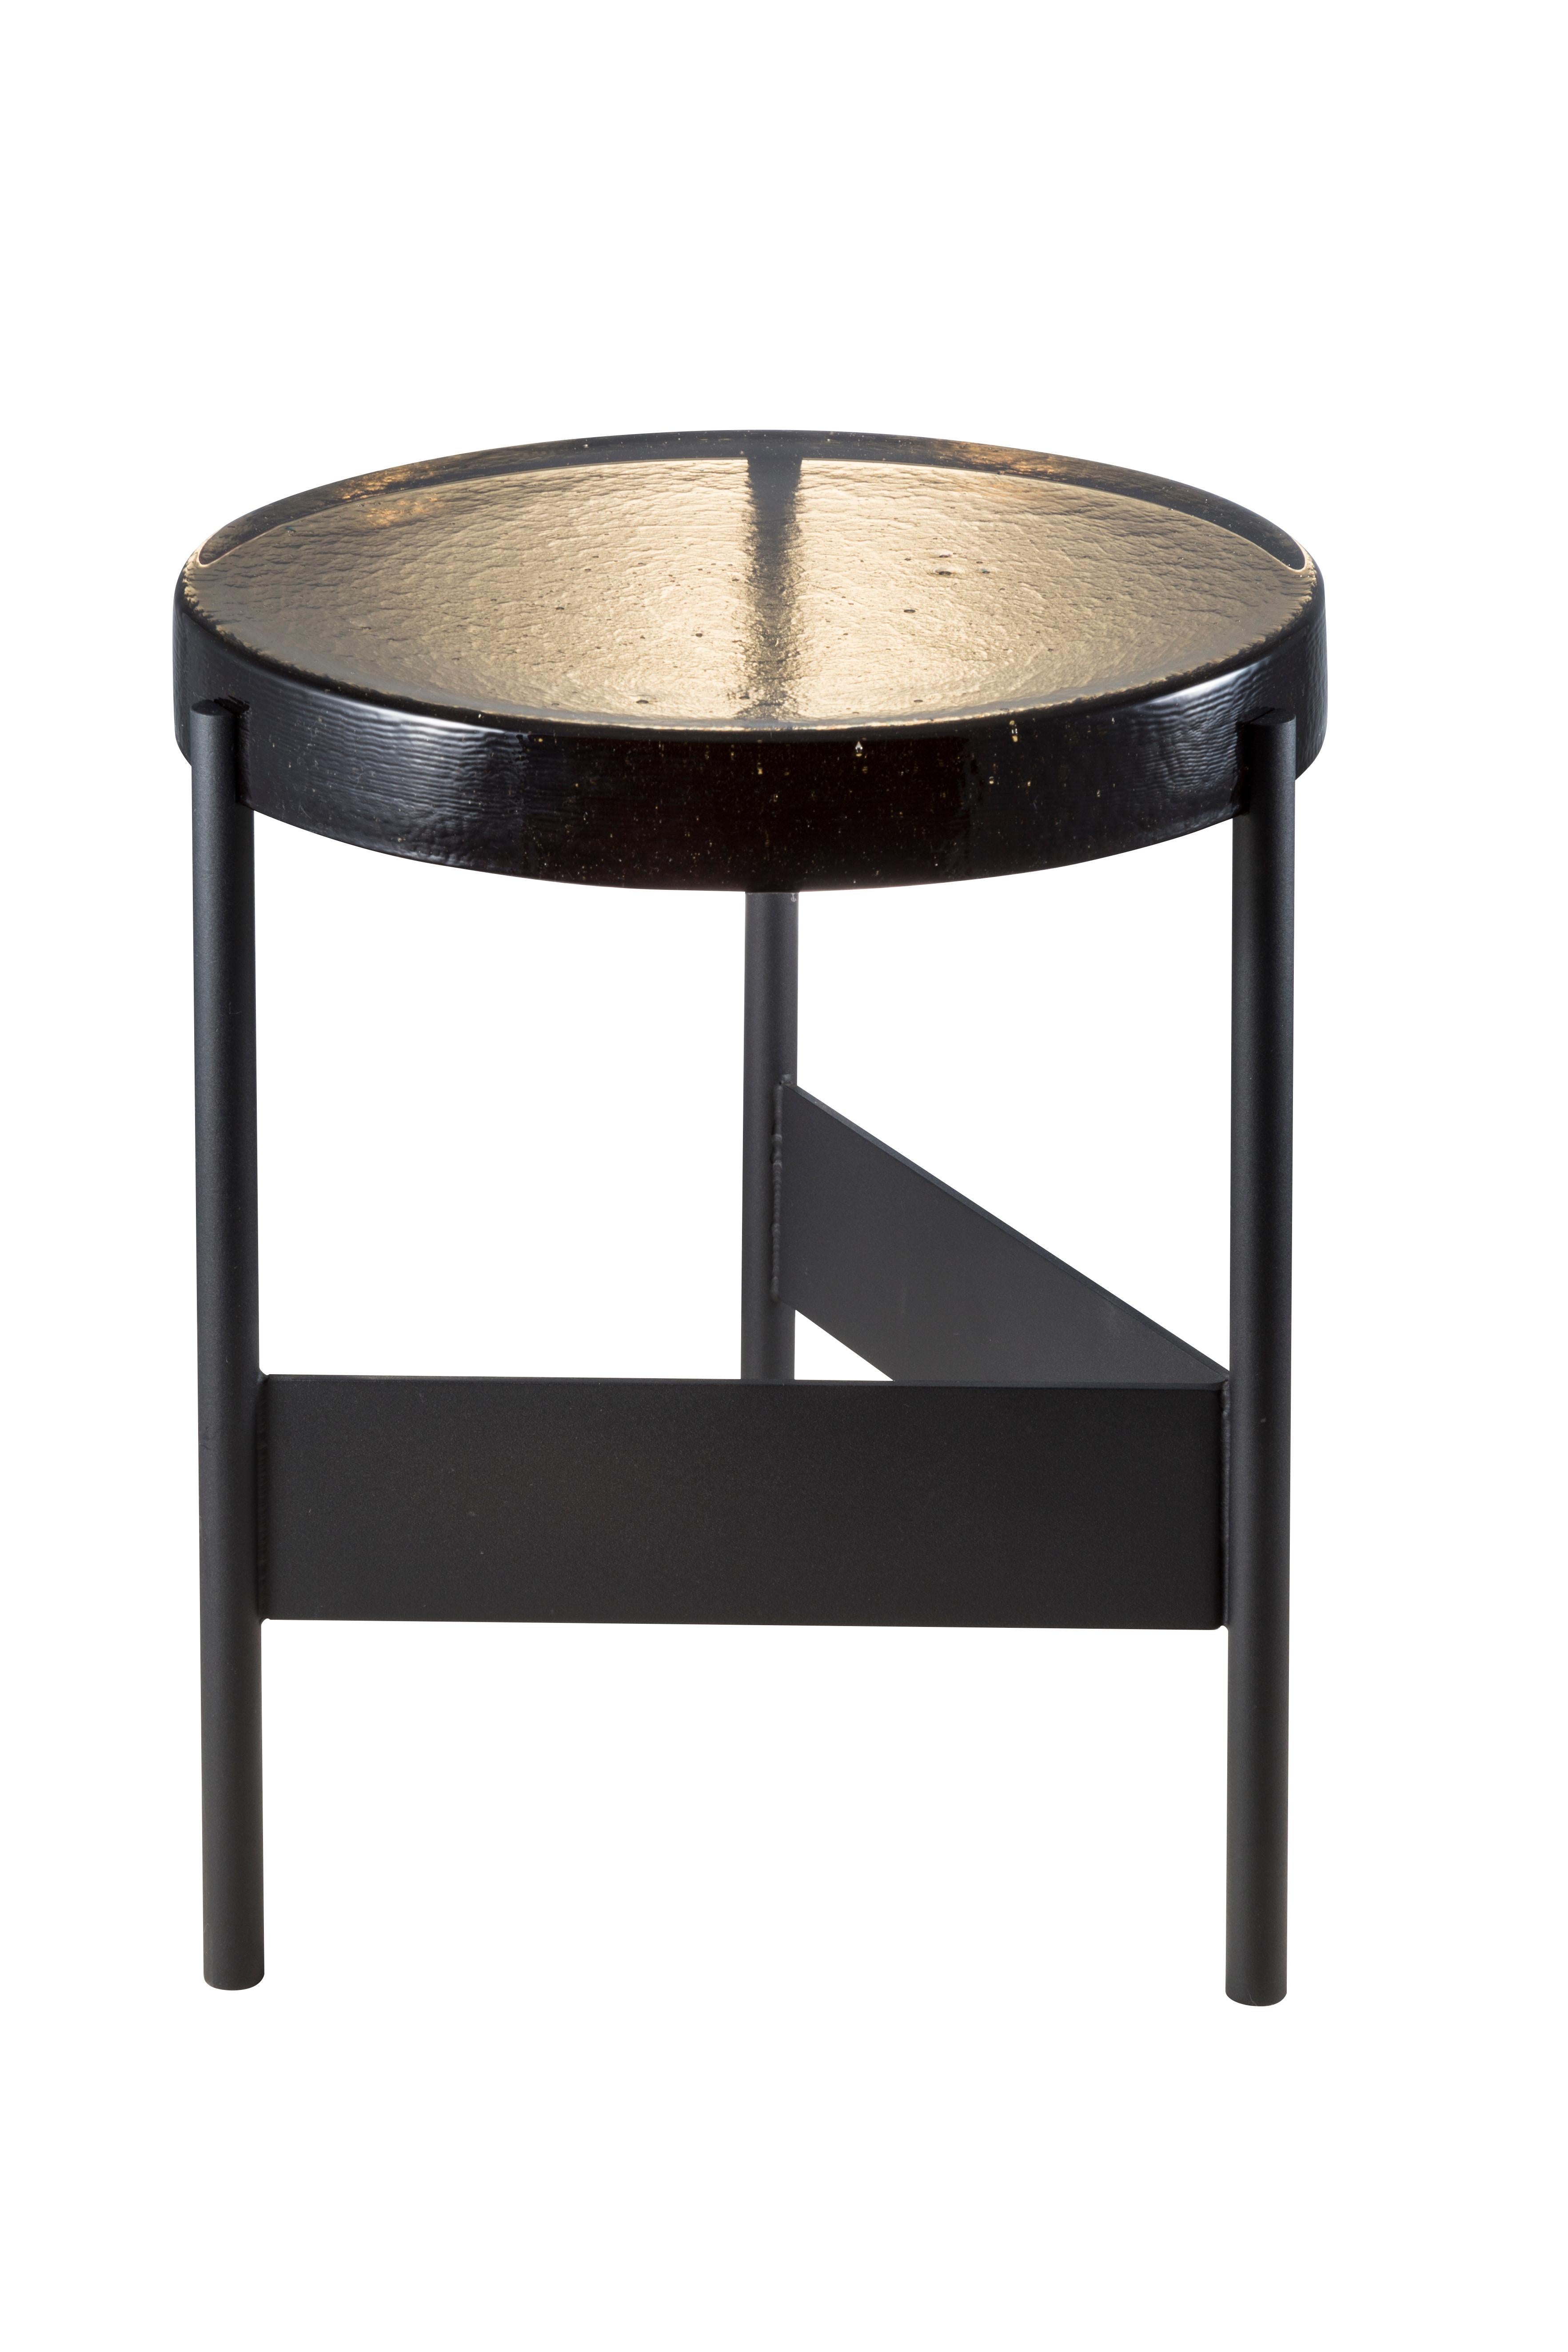 Alwa two smoky grey black side table by Pulpo
Dimensions: D 38 x H 44 cm
Materials: casted glass; powder coated steel 

Also available in different finishes.

Normally, glass is regarded as being lightweight with sharp edges. In contrast,